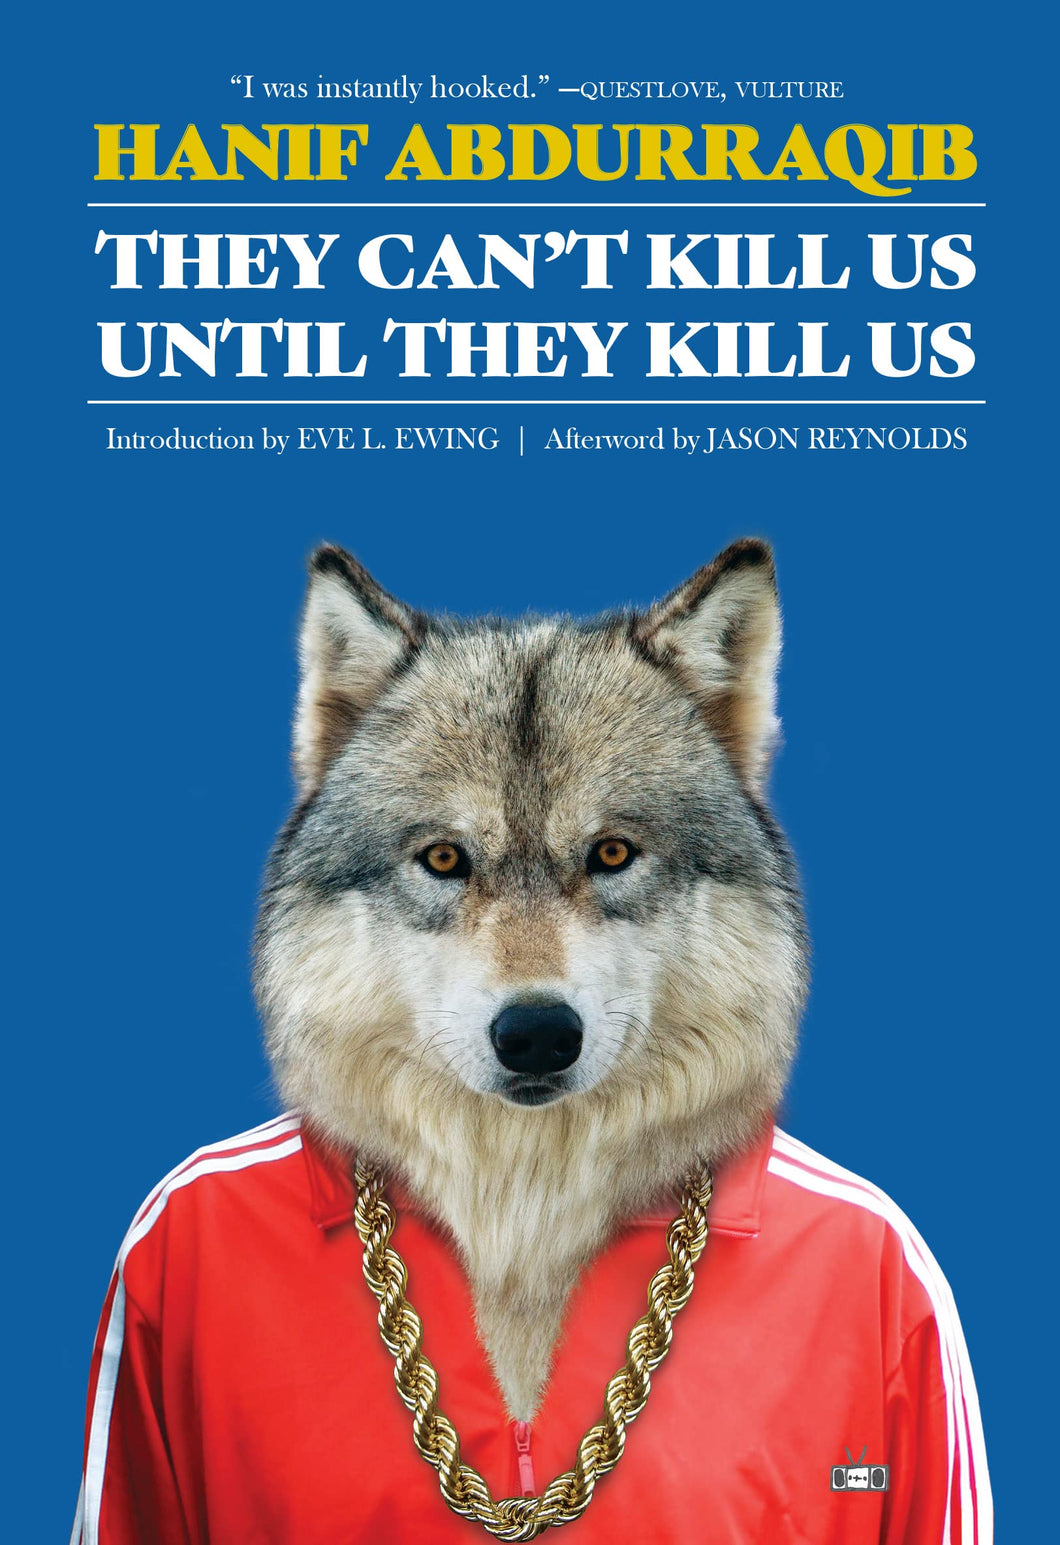 They Can't Kill Us Until They Kill Us: Expanded Edition by Hanif Abdurraqib